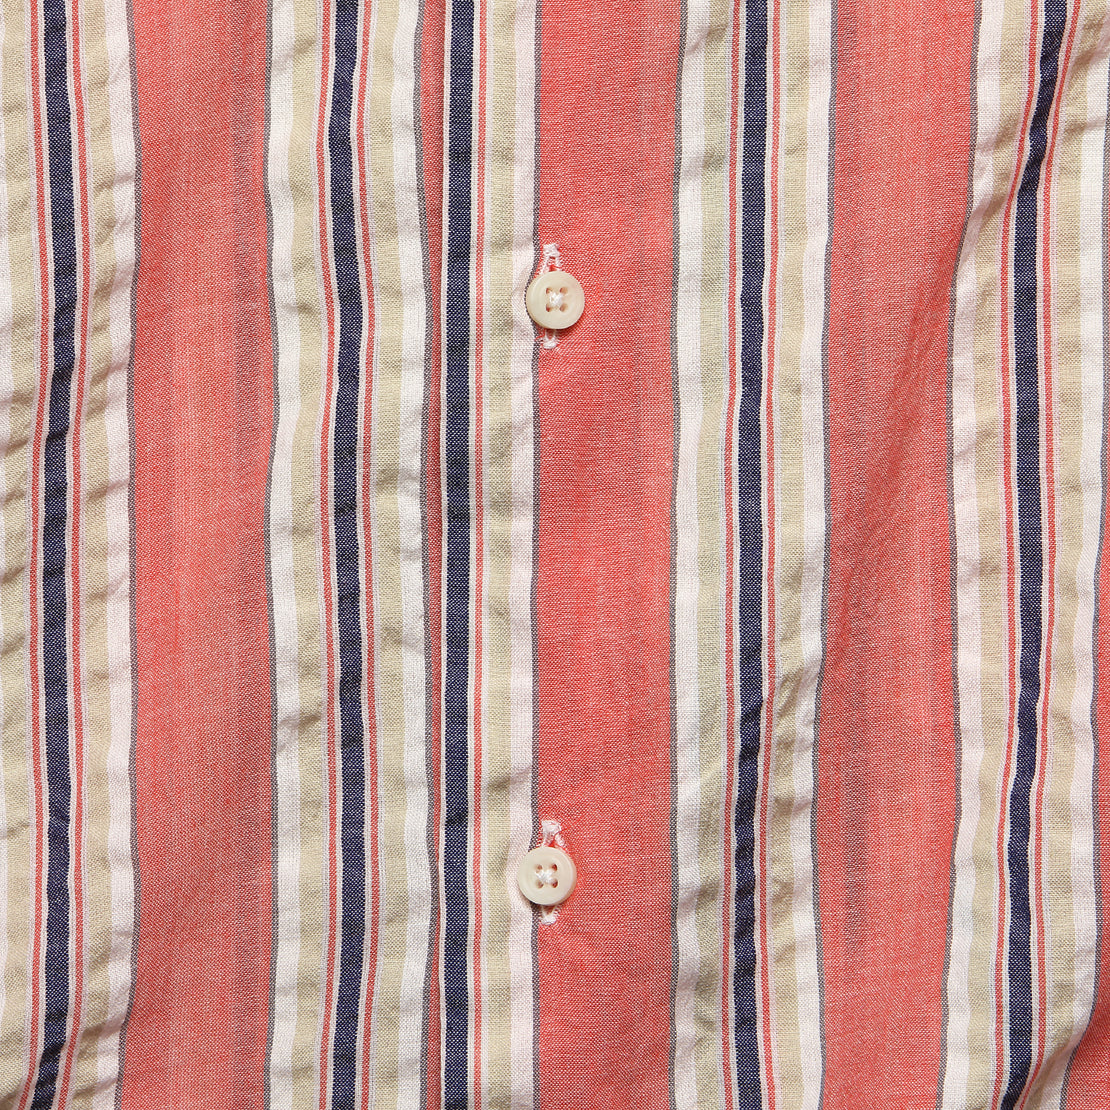 Awning Stripe Camp Shirt - Pink - Gitman Vintage - STAG Provisions - Tops - S/S Woven - Stripe